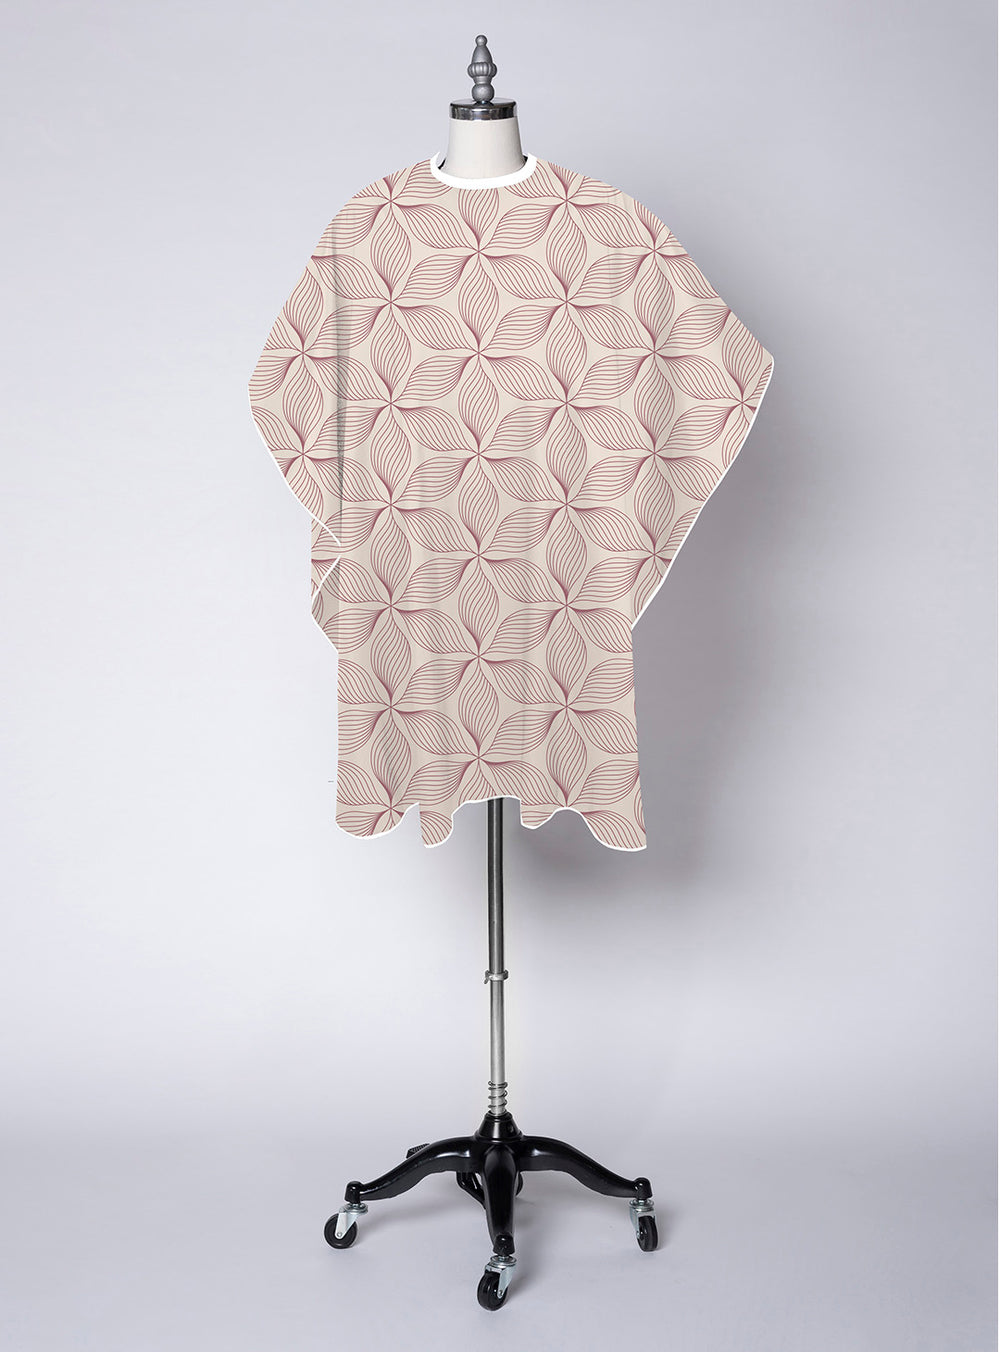 Fromm Premium Client Hairstyling Cape - Petals Print